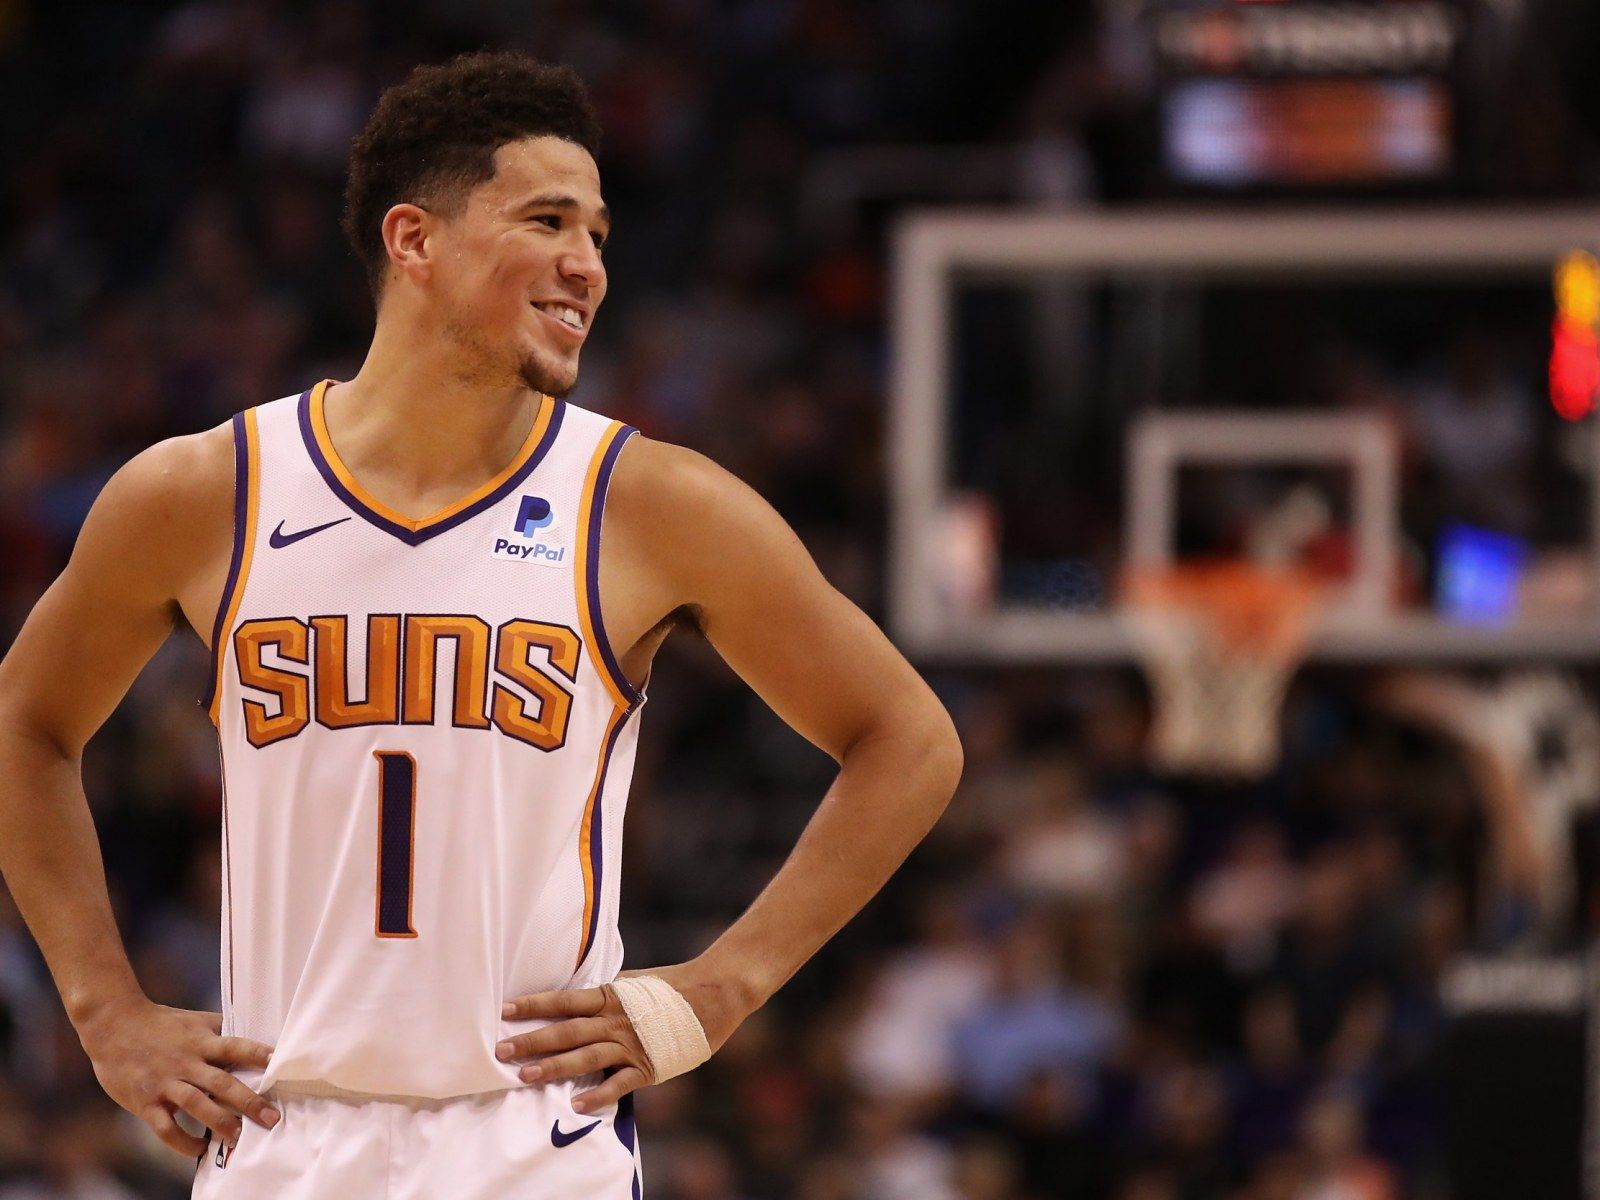 Devin Booker Makes NBA History With 59 Points in Loss Vs. Utah Jazz